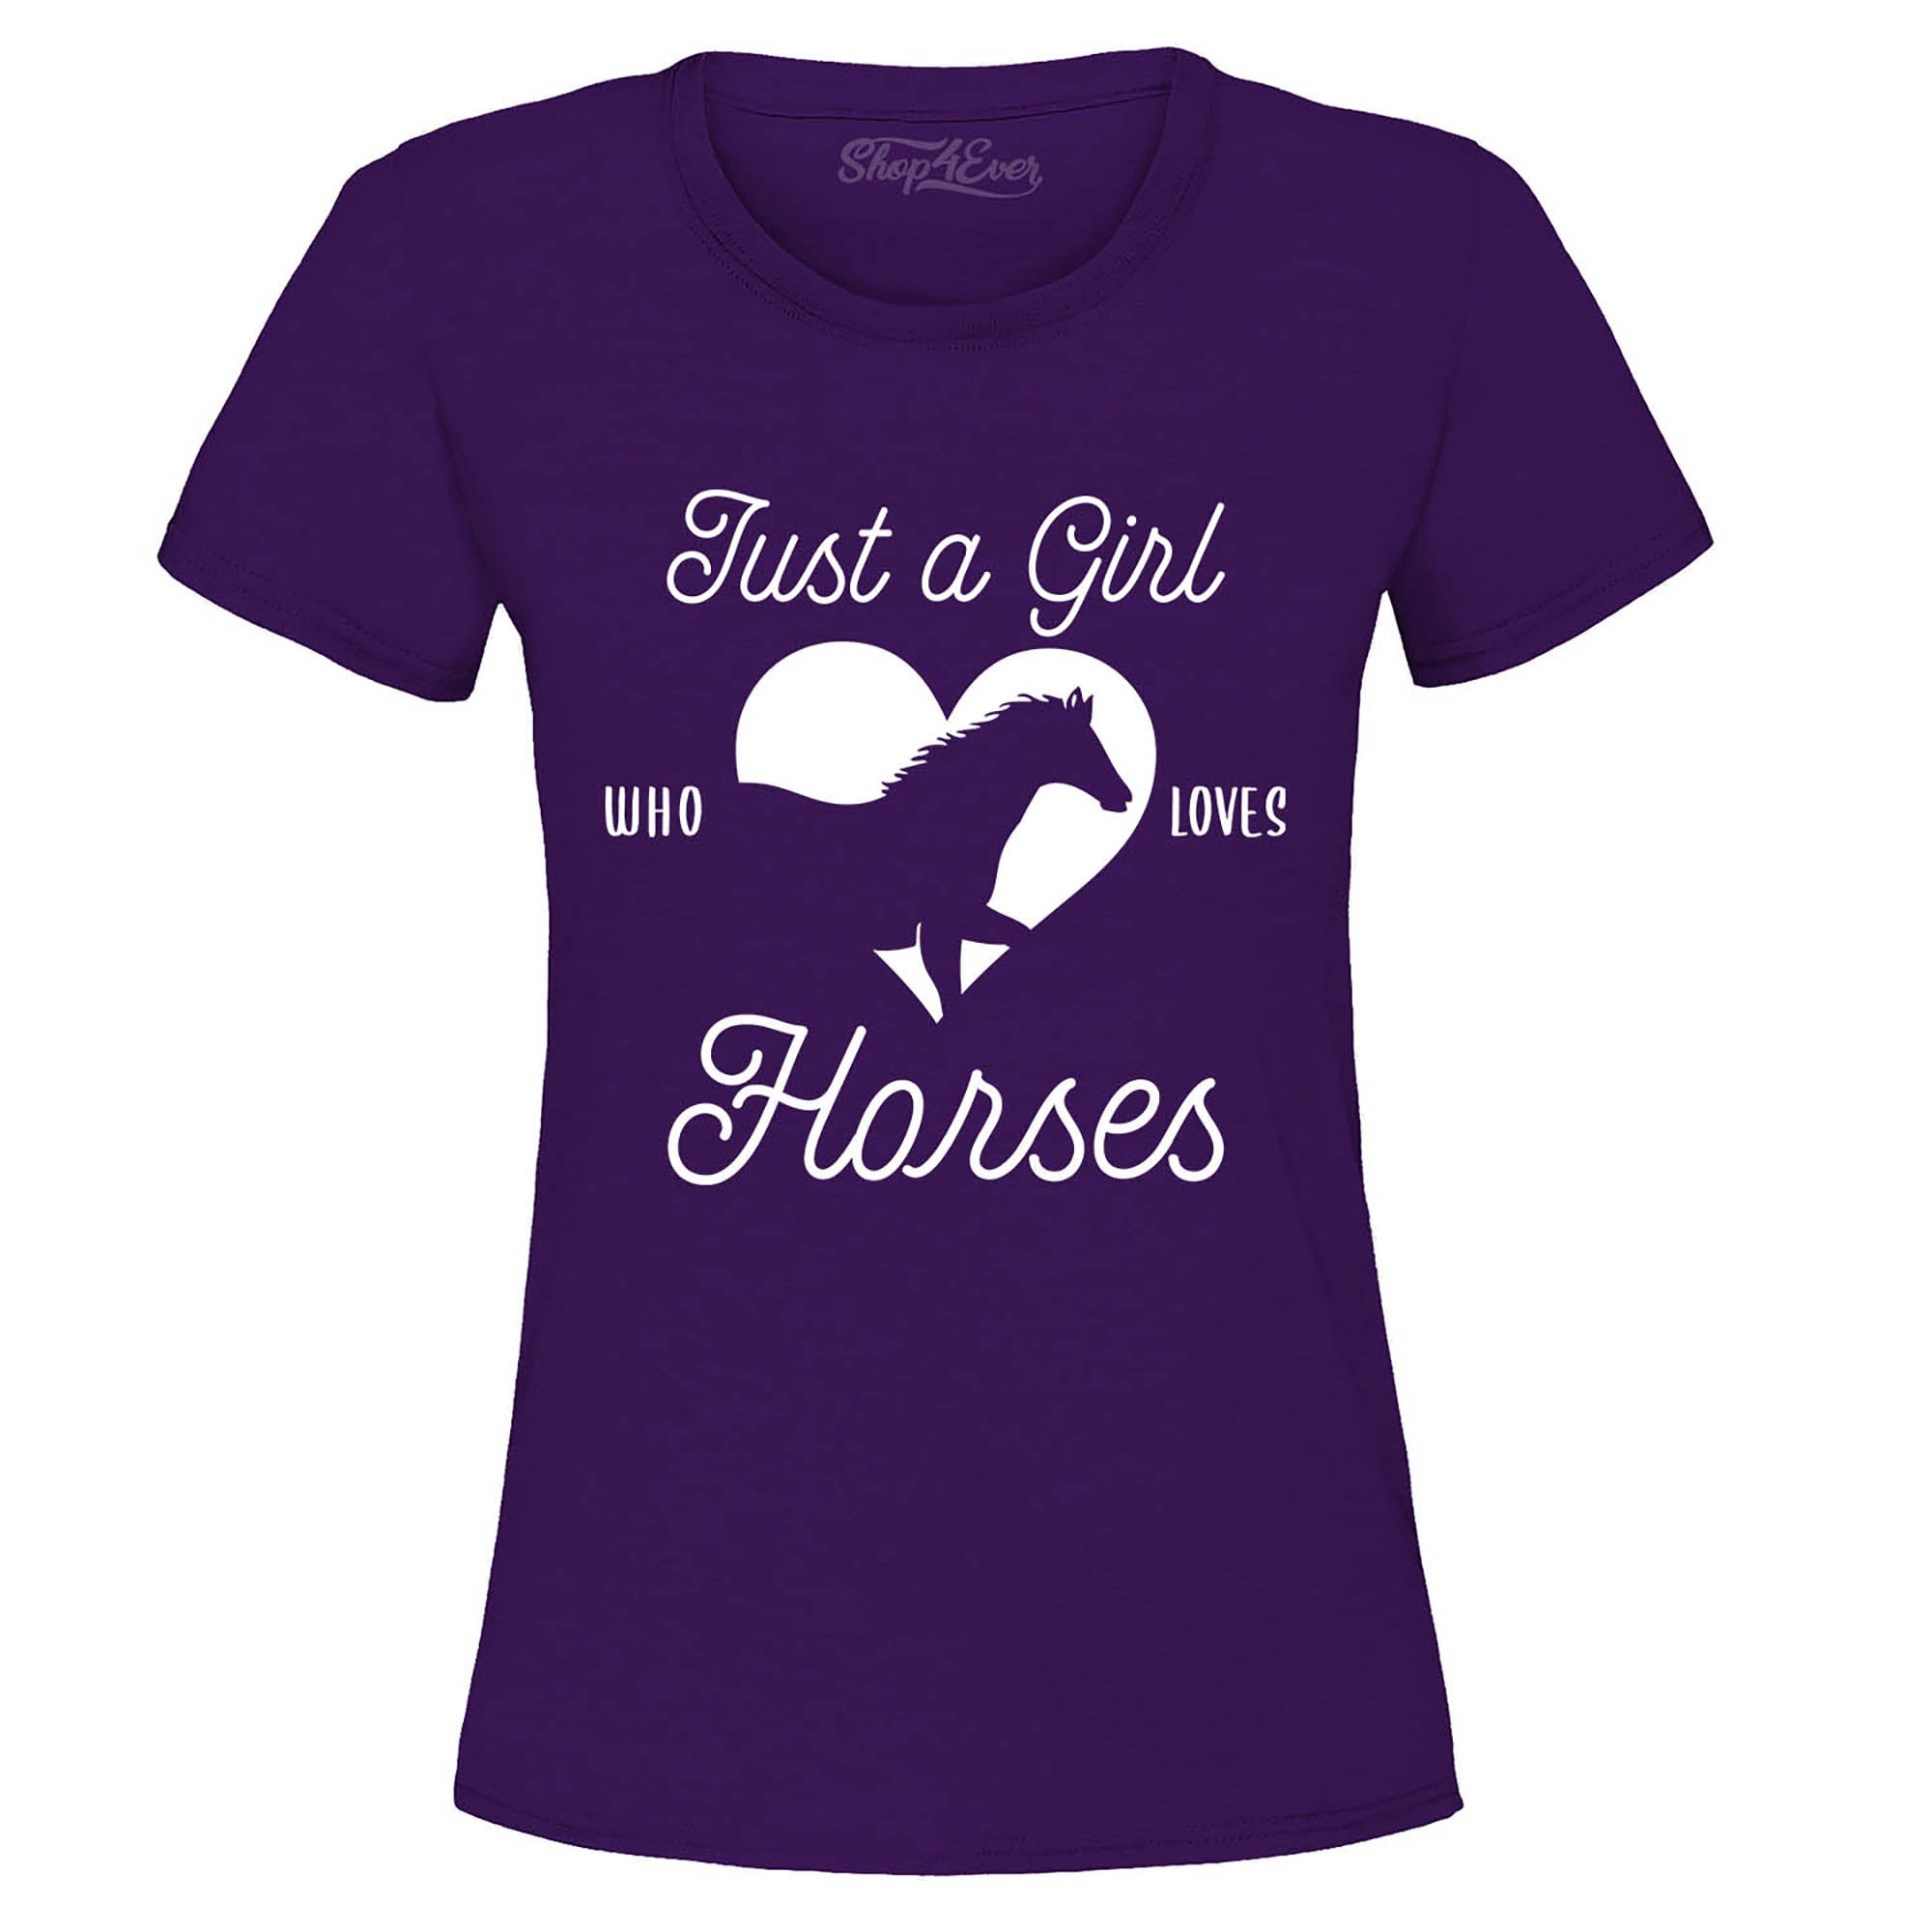 Just A Girl Who Loves Horses Women's T-Shirt